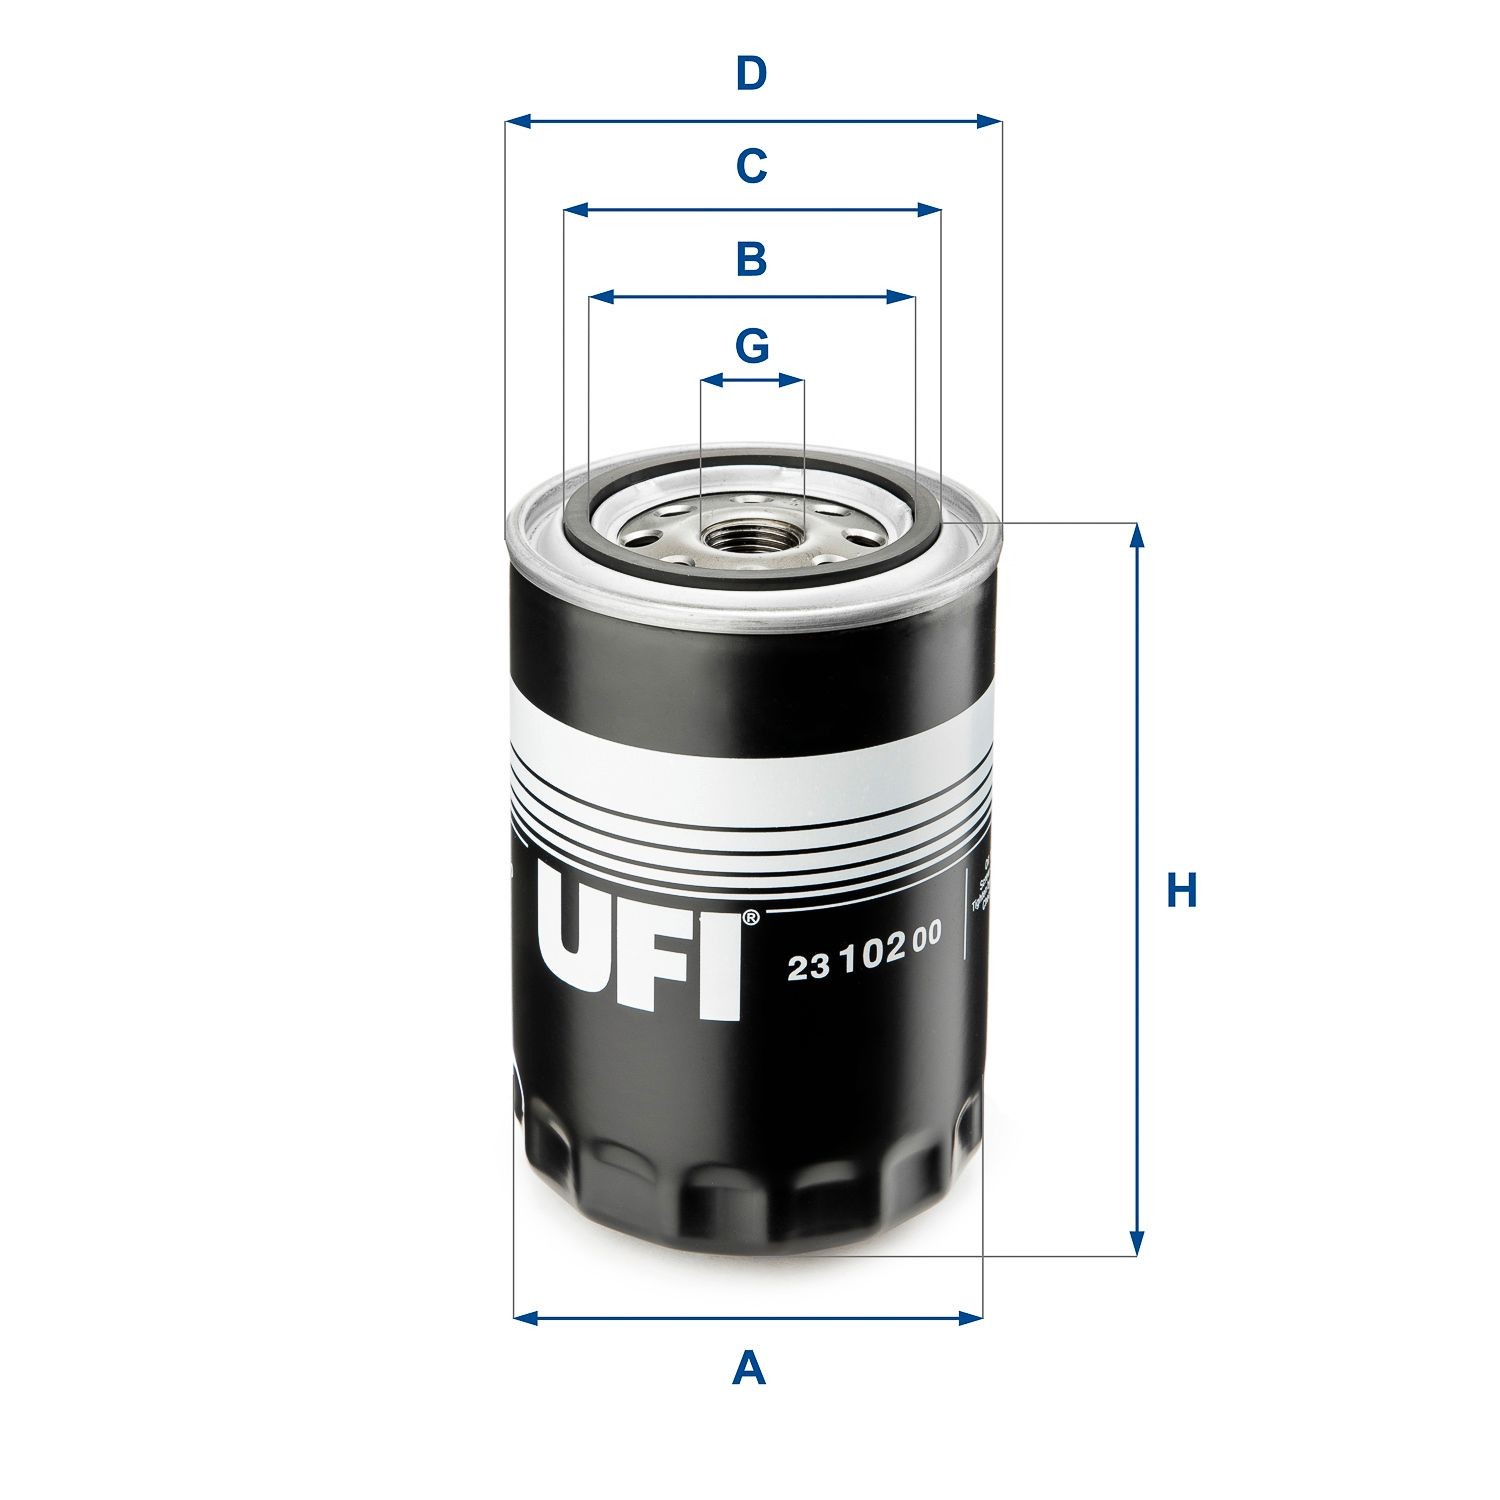 UFI 23.102.00 Oil filter 3/4-16 UNF, with one anti-return valve, Spin-on Filter